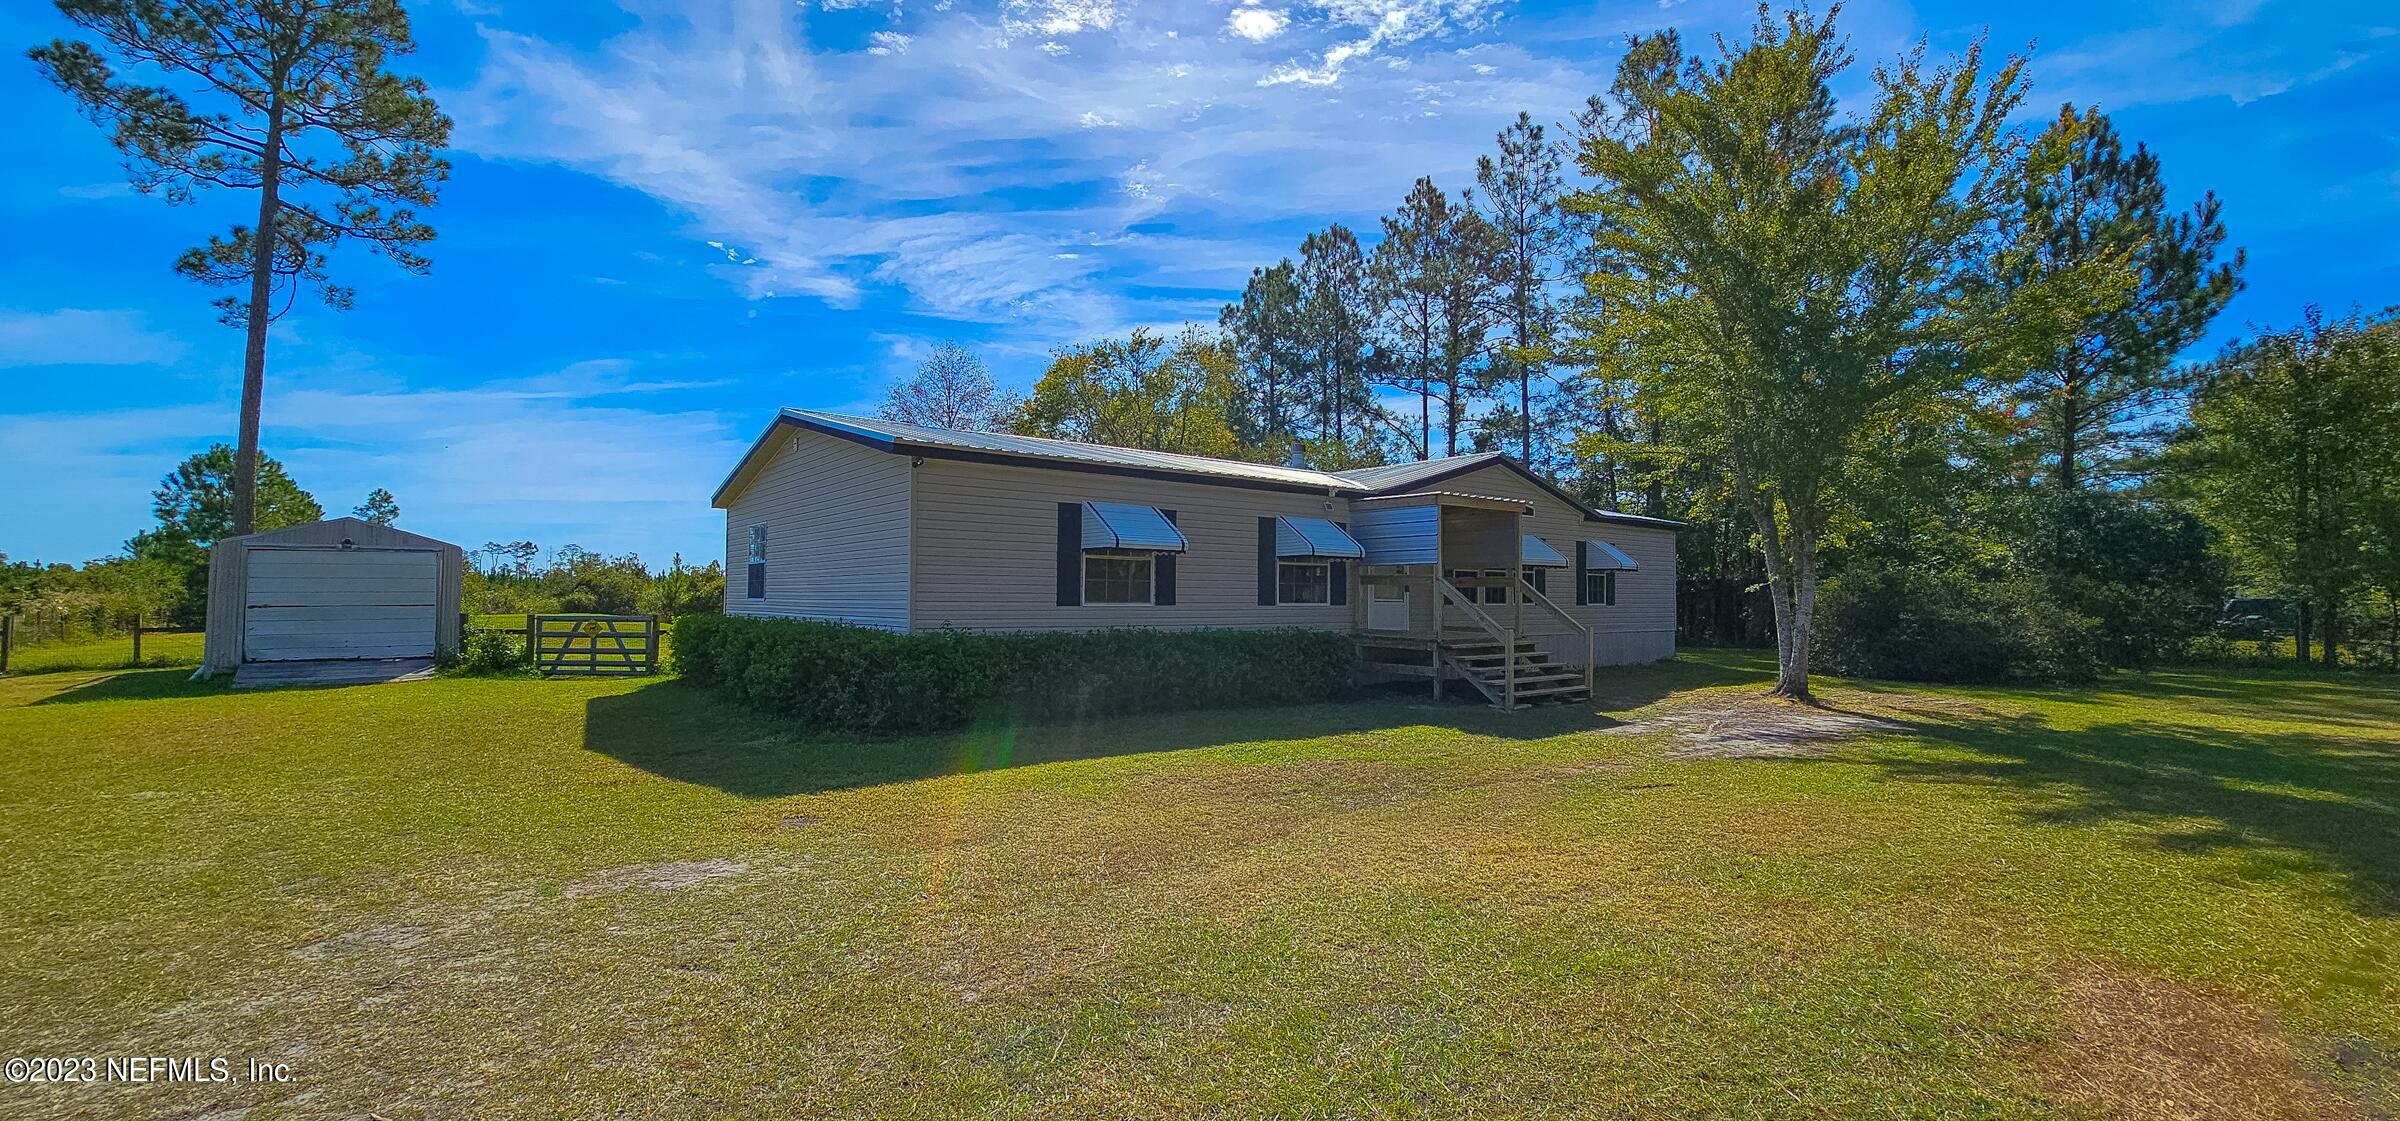 Bryceville, FL home for sale located at 11169 County Road 121, Bryceville, FL 32009